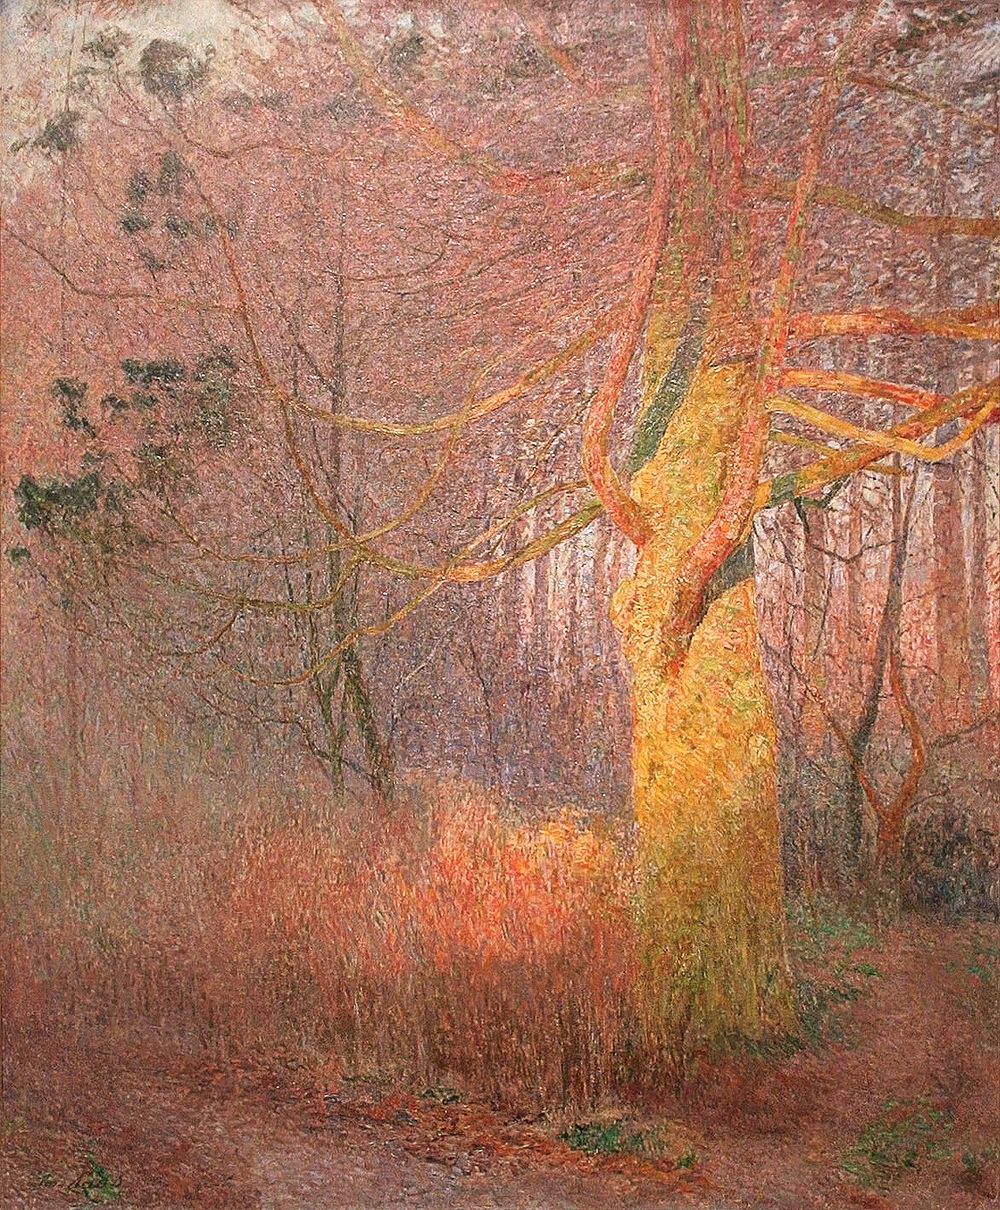 Tree in the Sun (1900) oil painting art by Emile Claus. Original public domain image from Wikimedia Commons. Digitally…